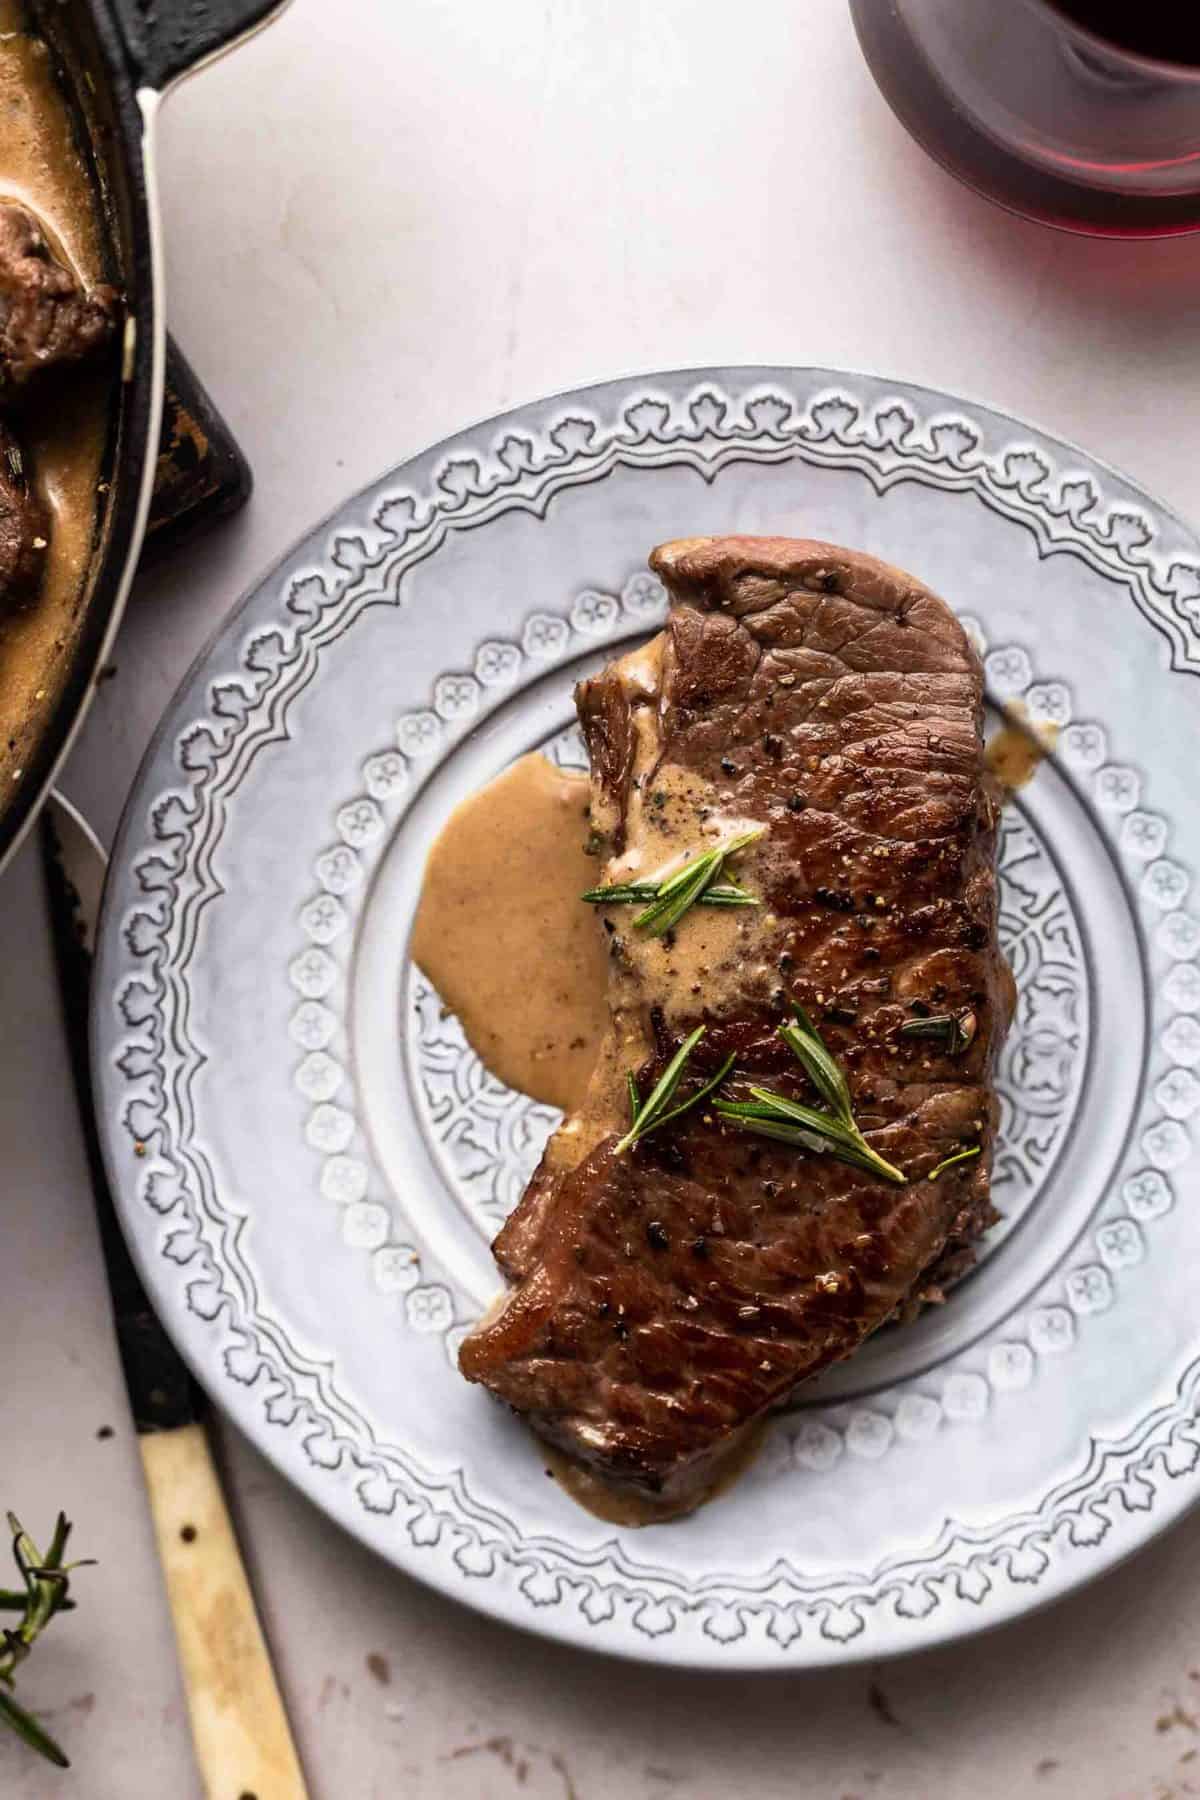 Garlic Rosemary Steak With Sherry Cream Sauce on a plate